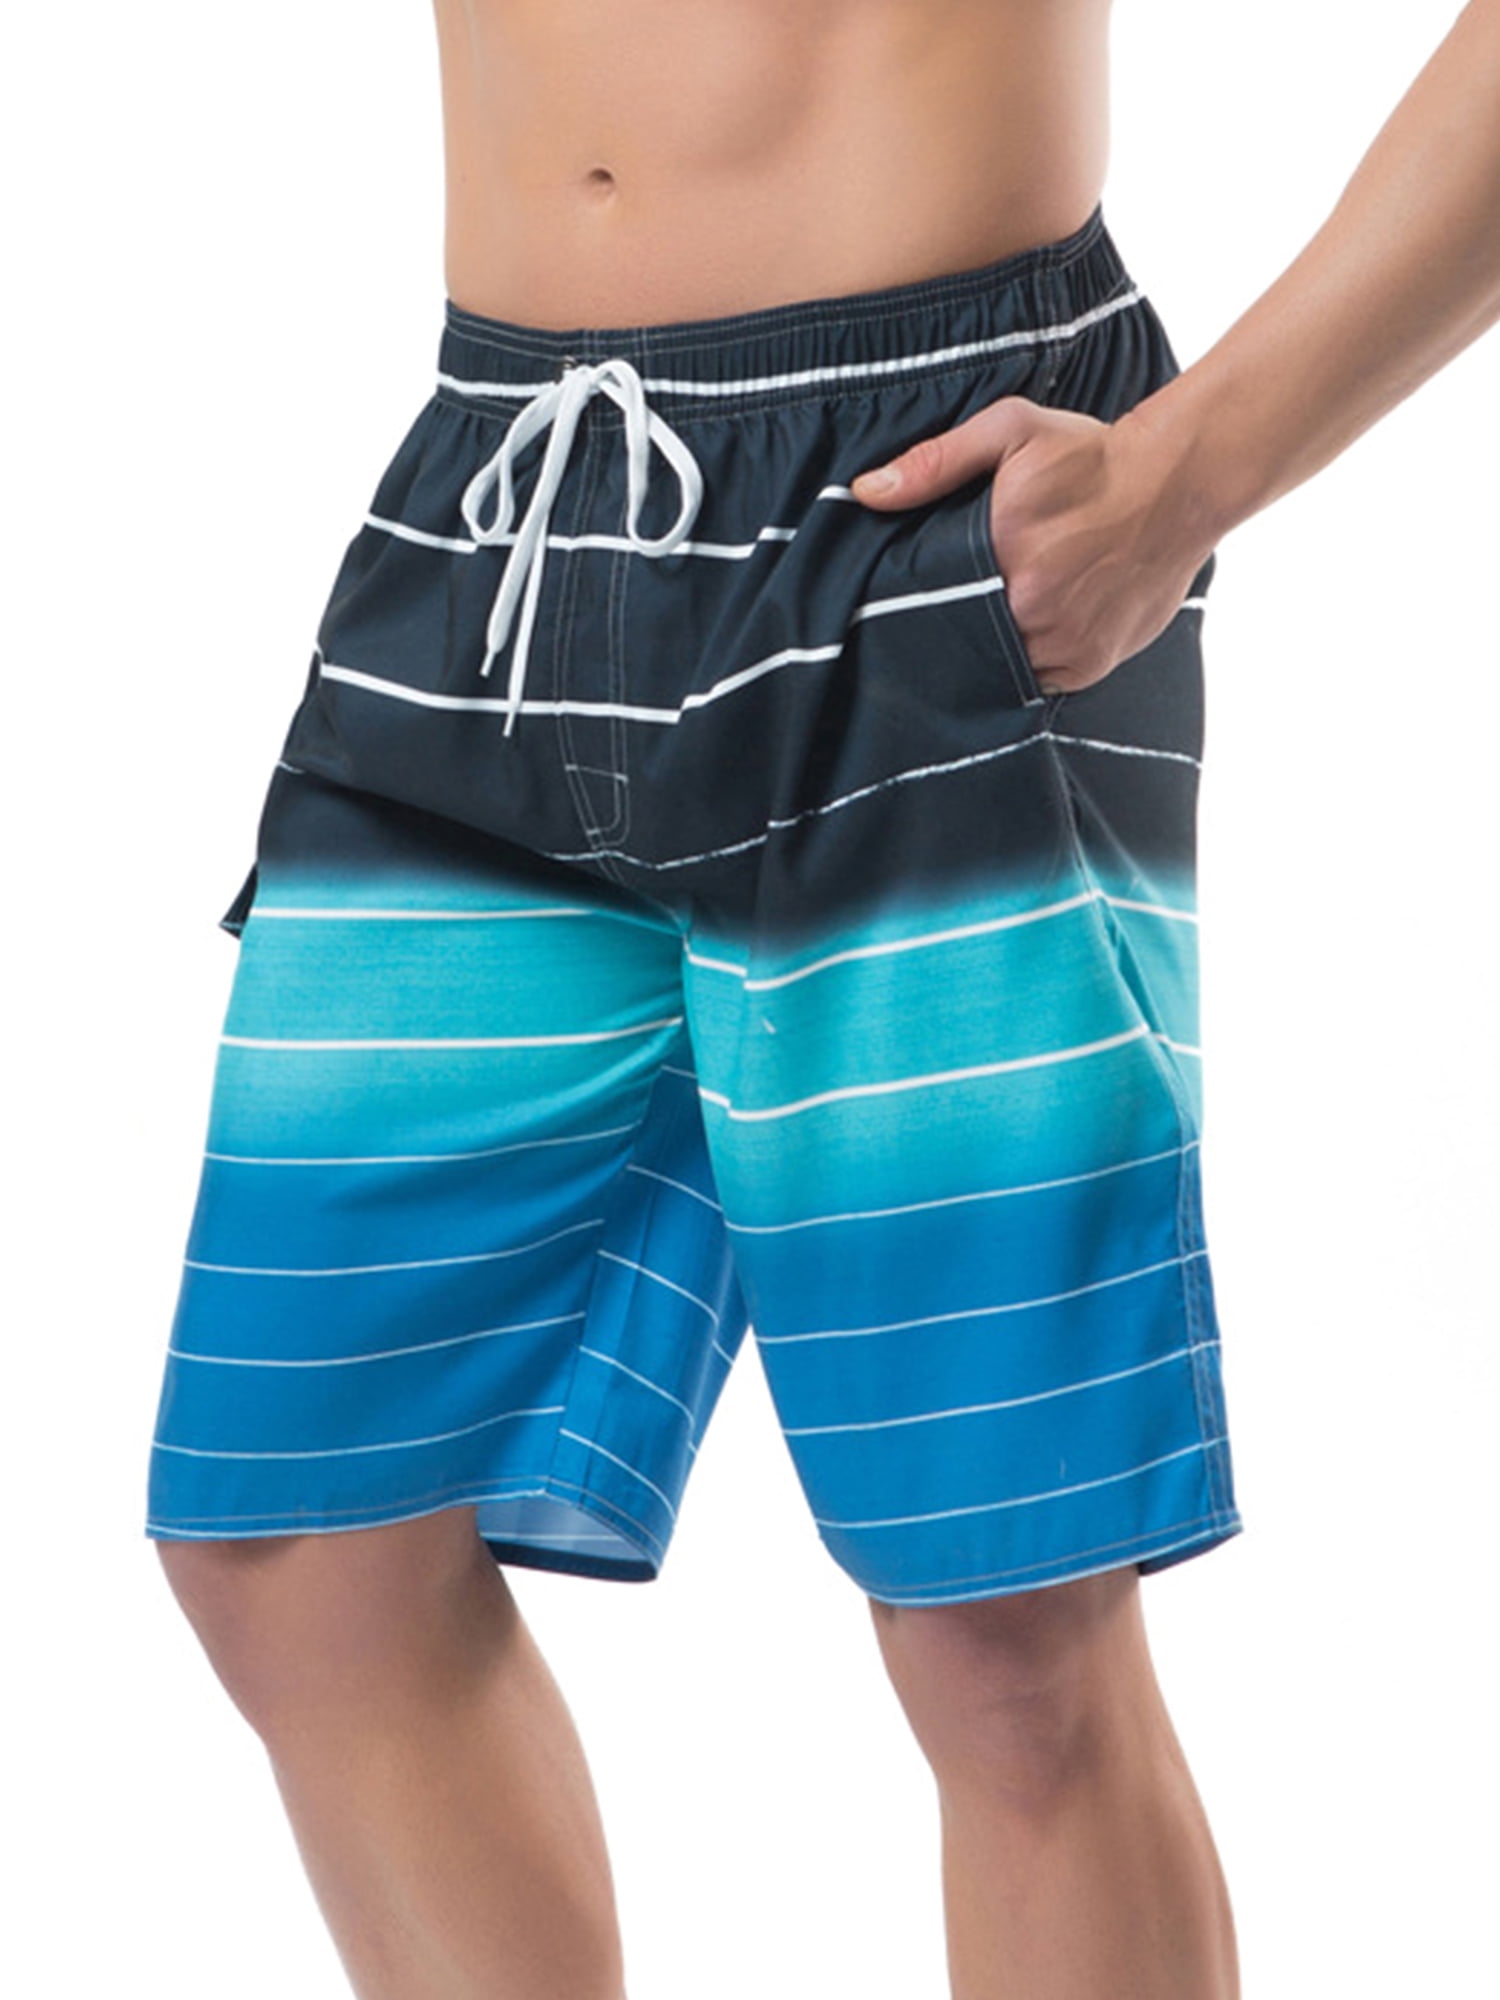 Swimming Trunks Men High Quality Boxer Beach Shorts Swimwear Striped With Pocket 